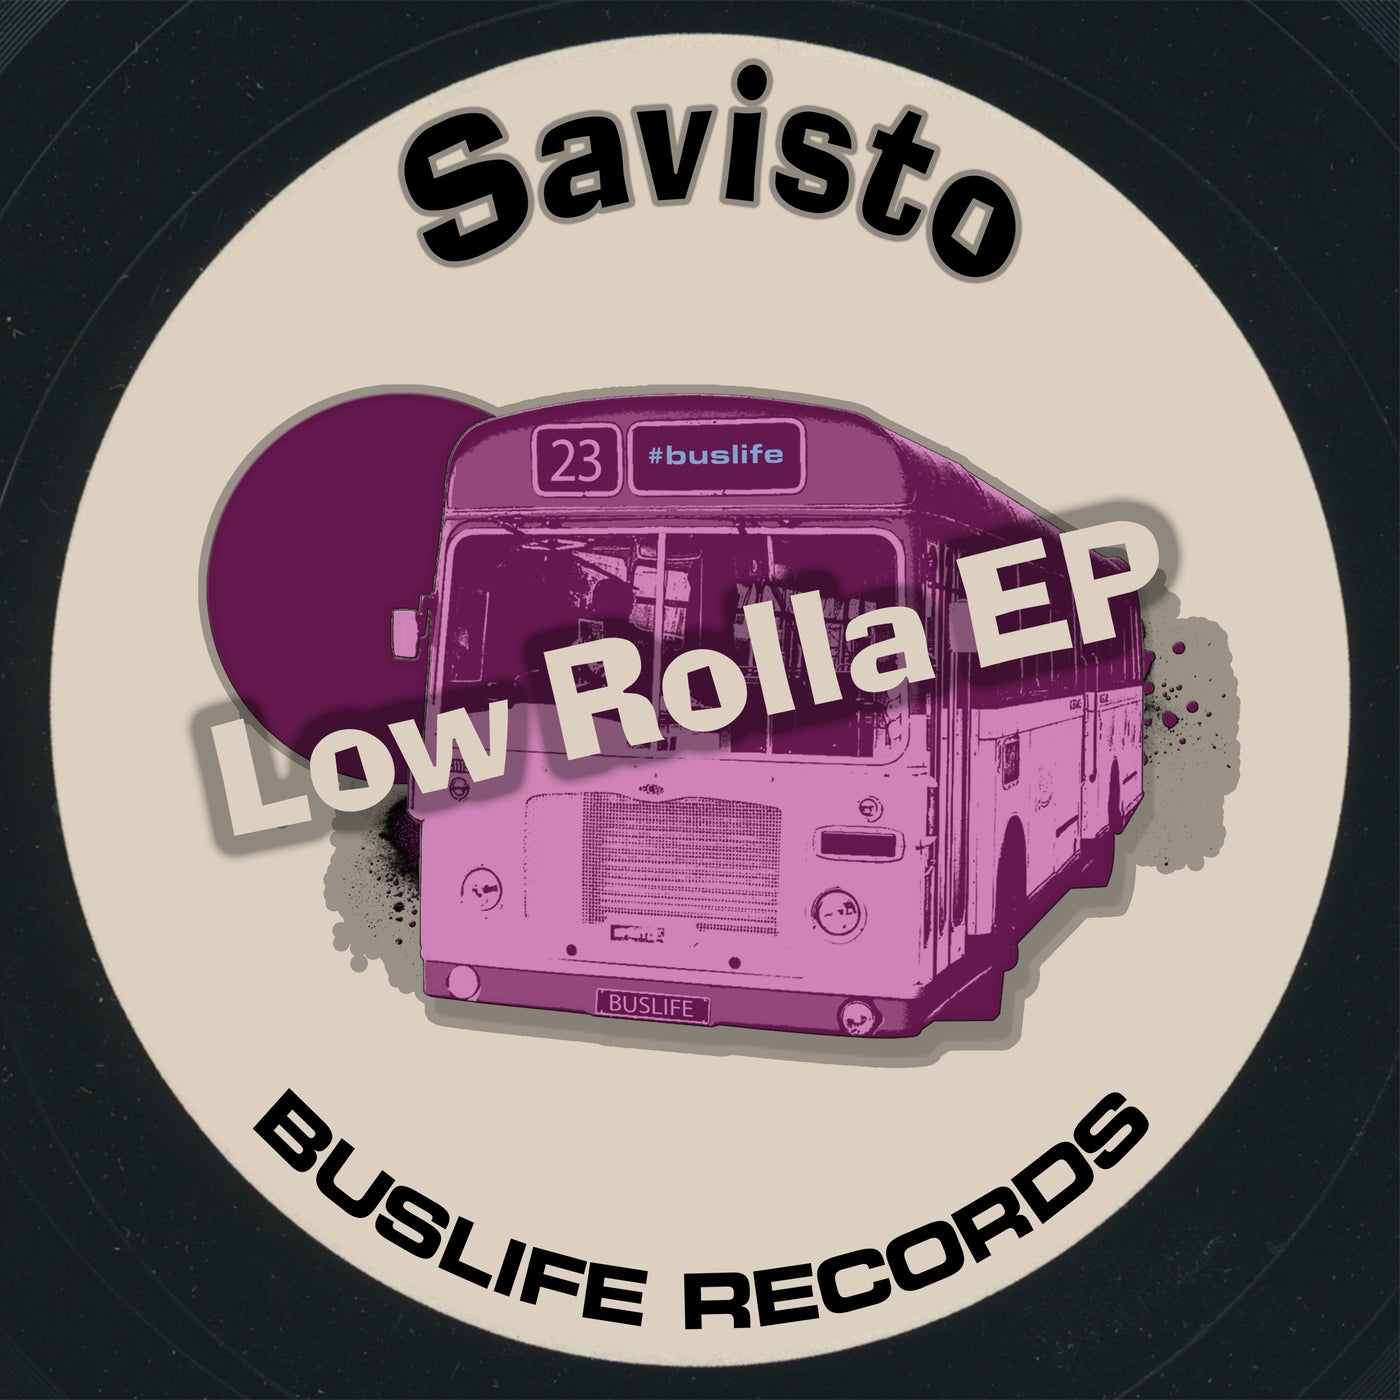 Low Rolla EP